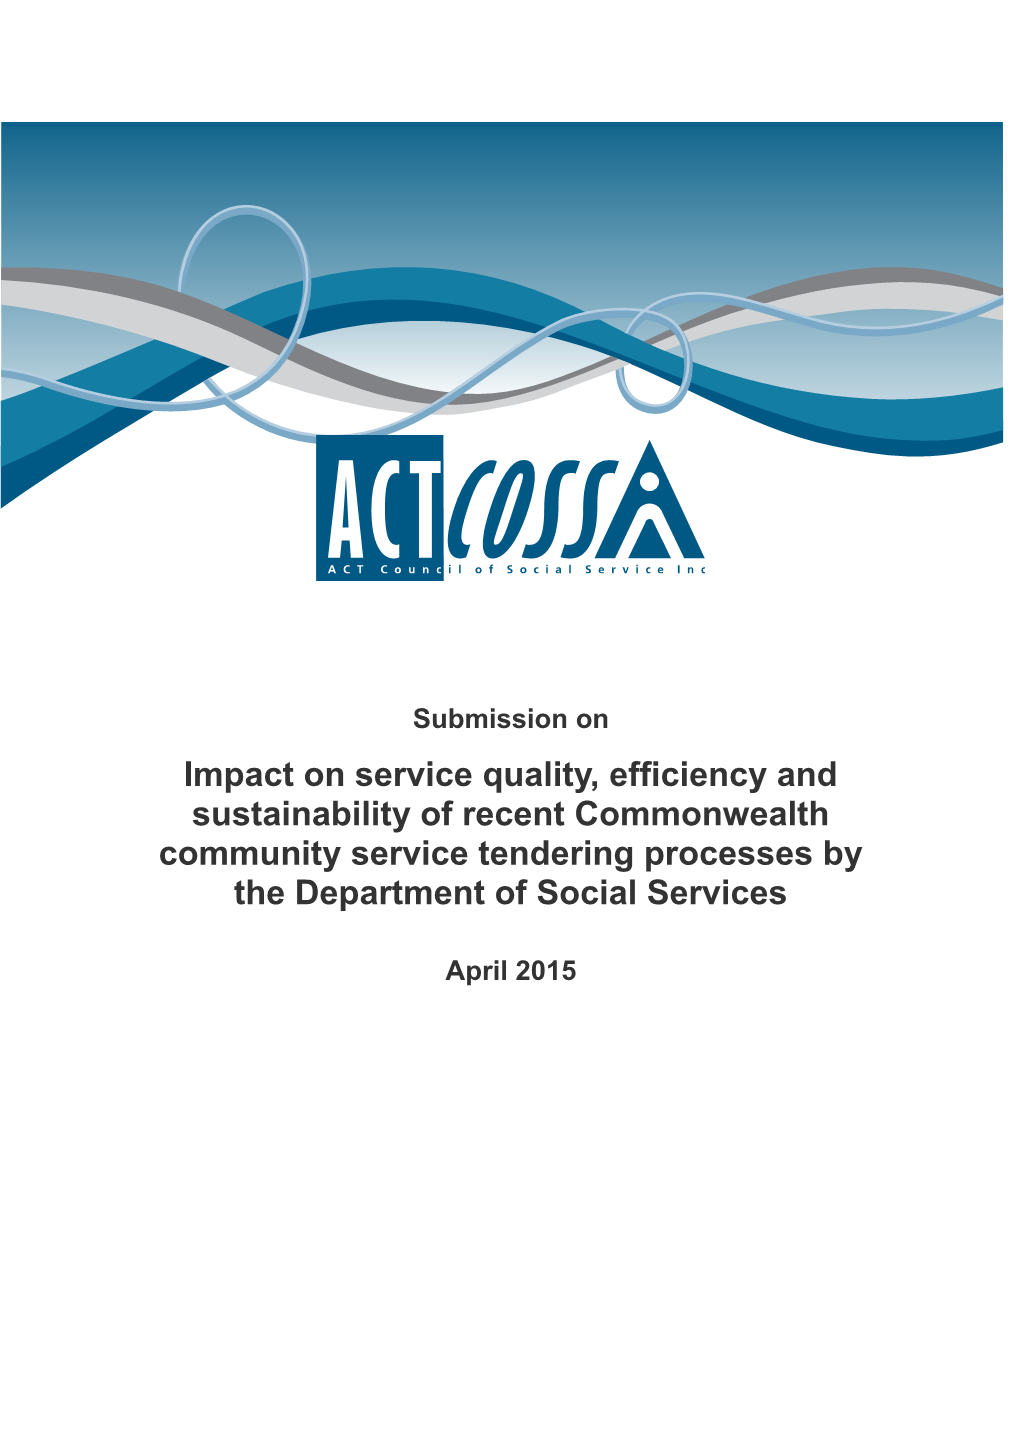 Impact on Service Quality, Efficiency and Sustainability of Recent Commonwealth Community